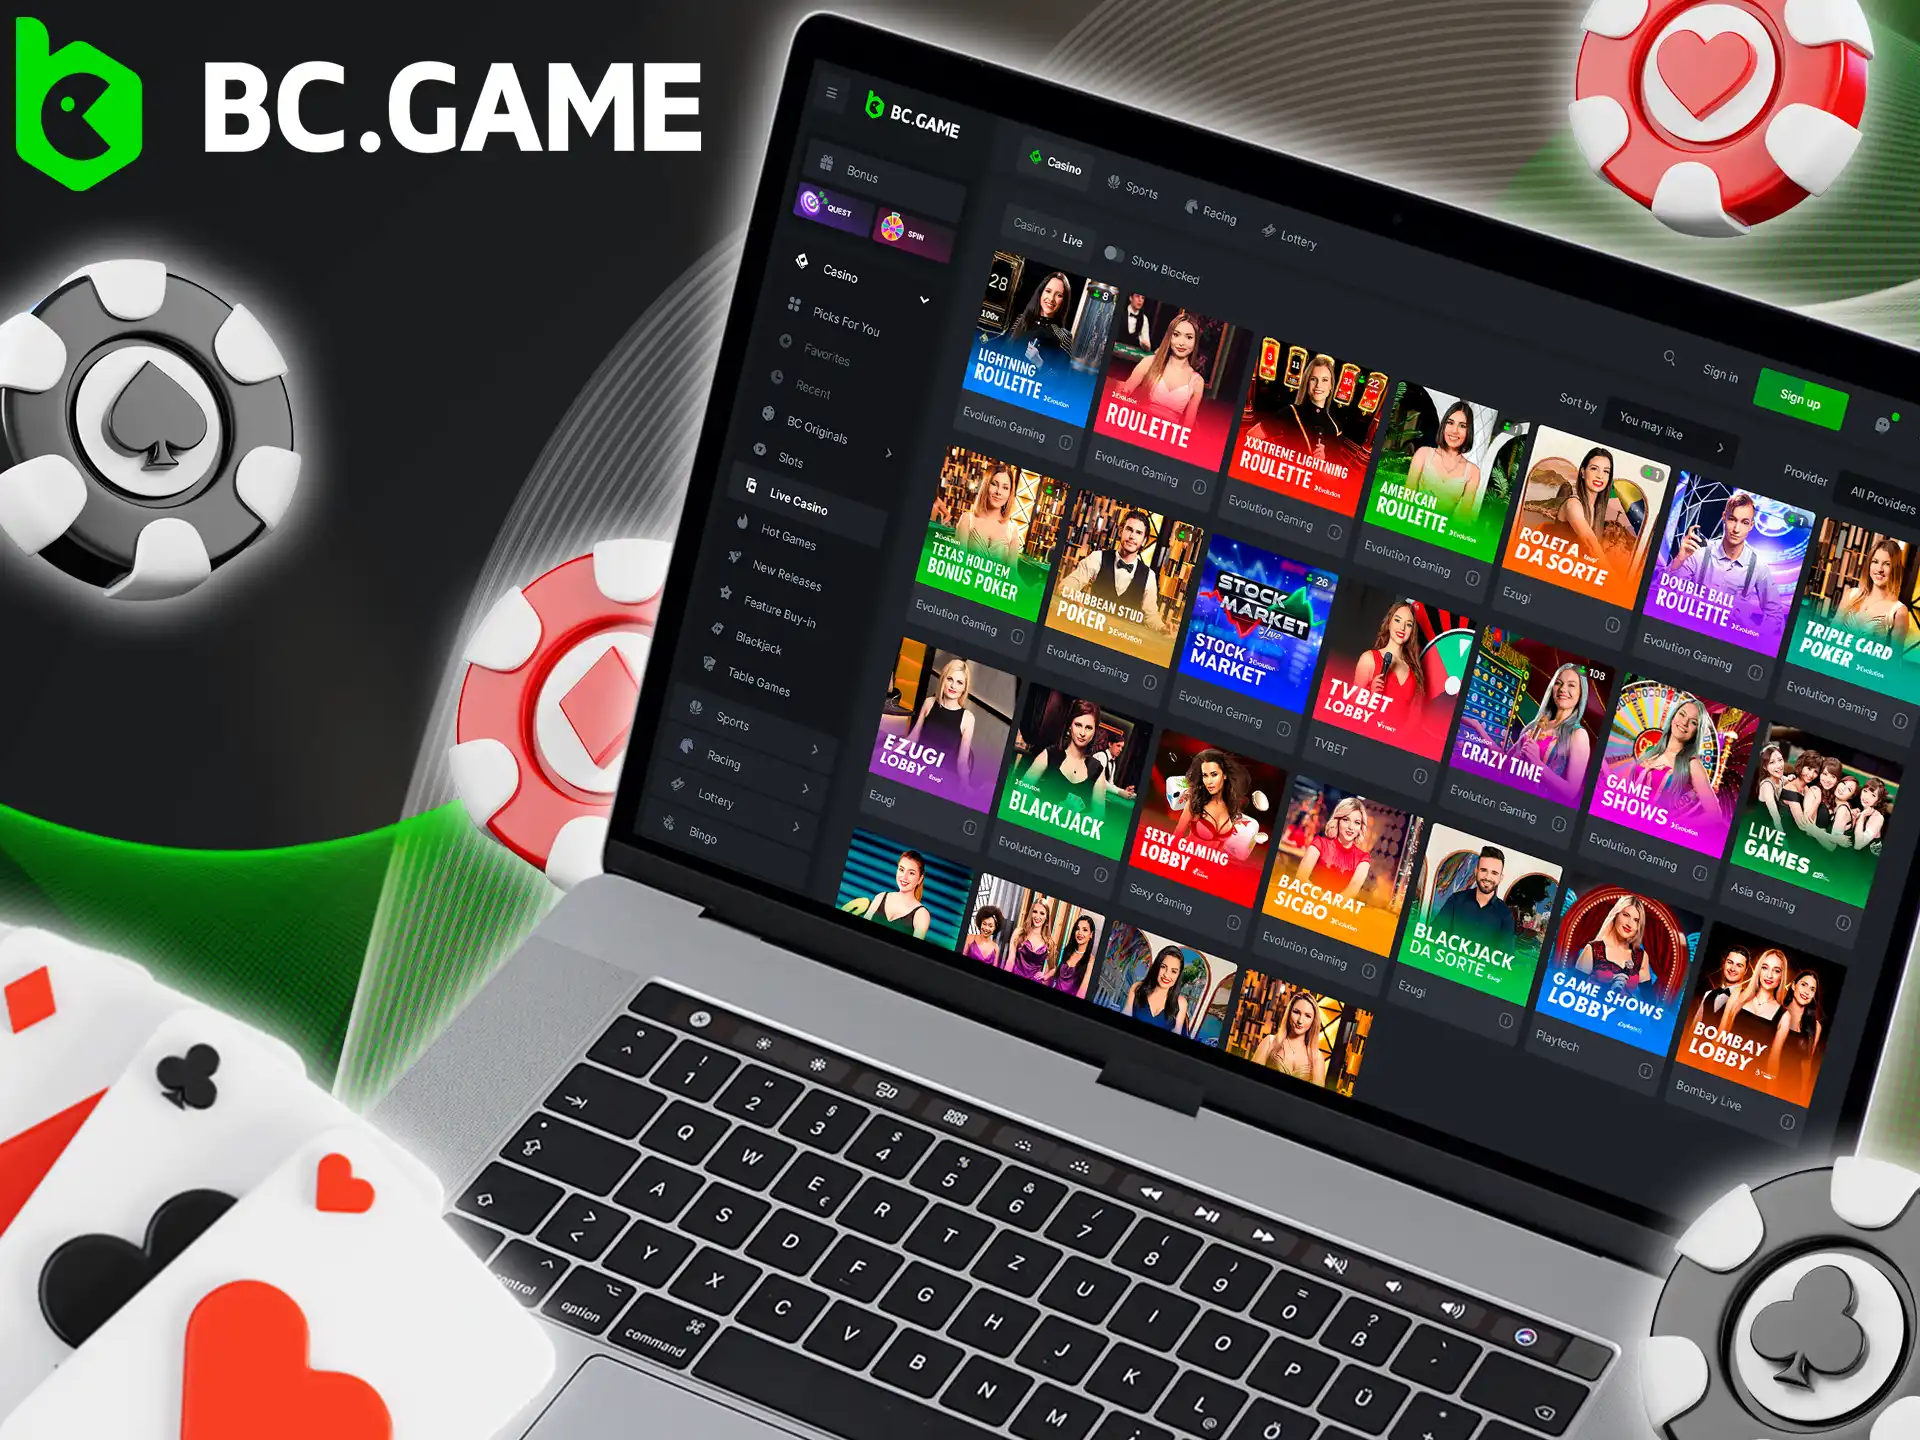 Experience the thrill of playing live casino games at BC Game.